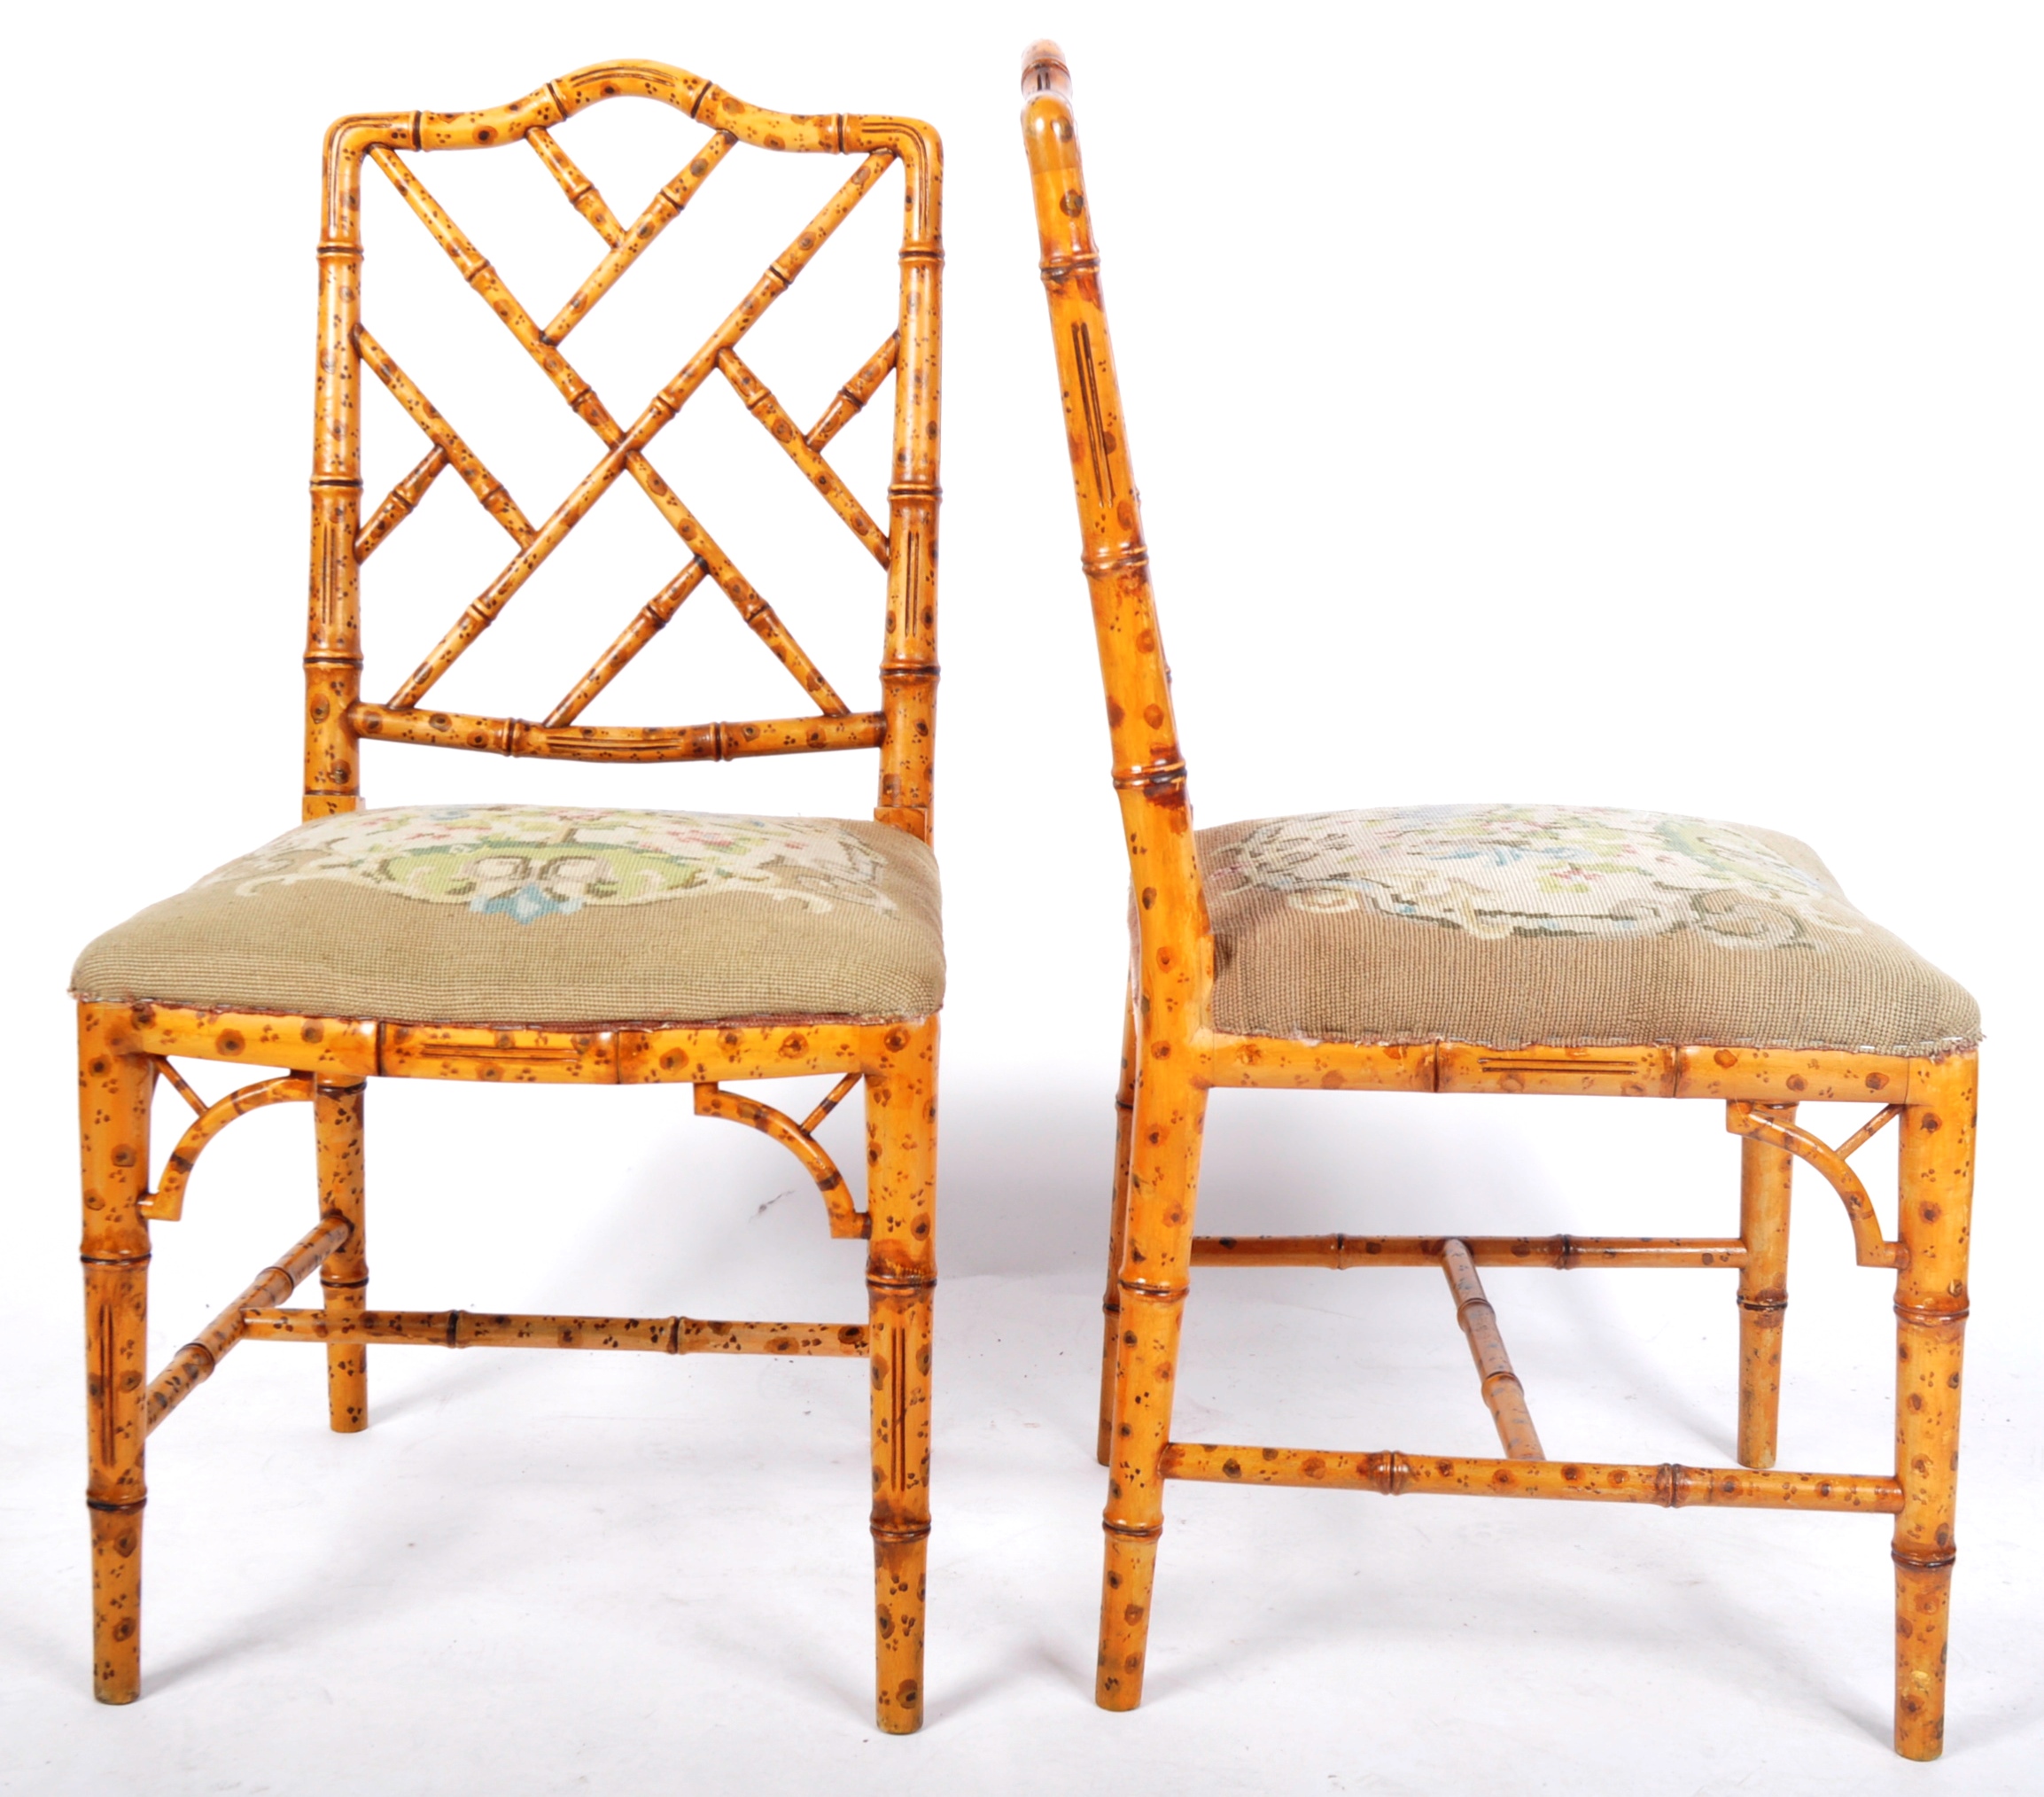 MATCHING PAIR OF 18TH CENTURY STYLE FAUX BAMBOO CHAIRS - Image 5 of 7